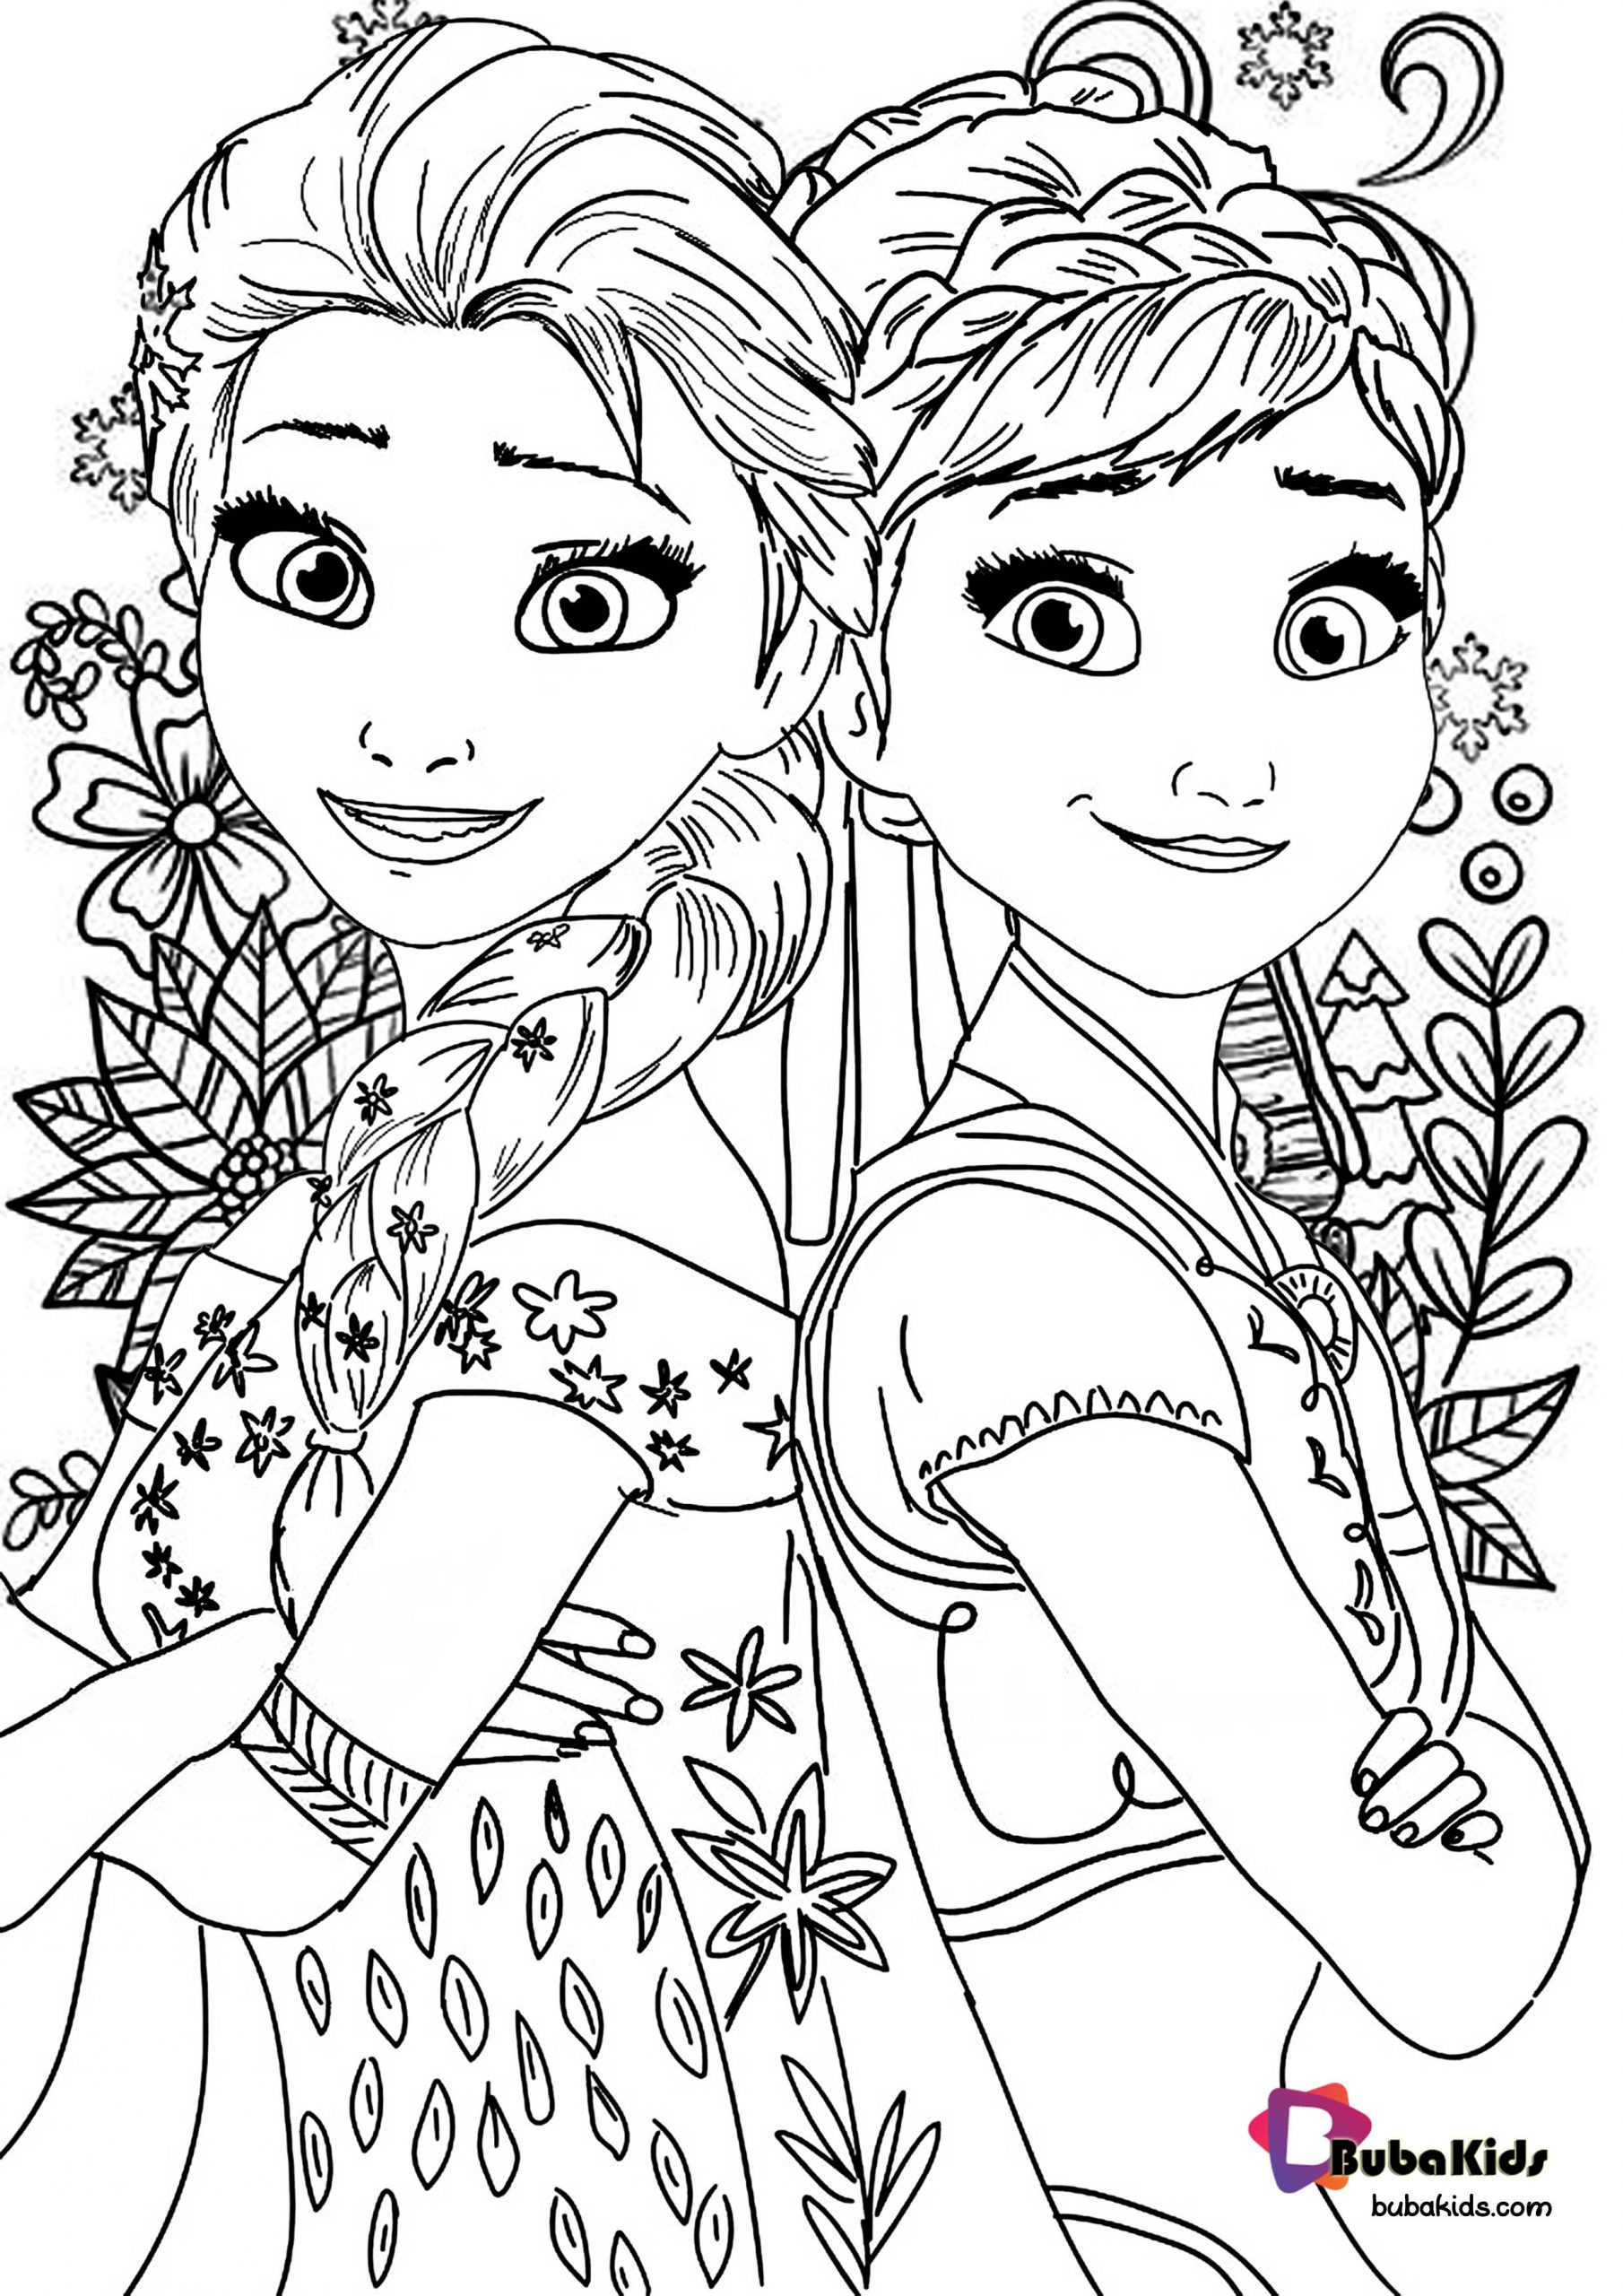 Frozen 2 Coloring Page For Kids Wallpaper